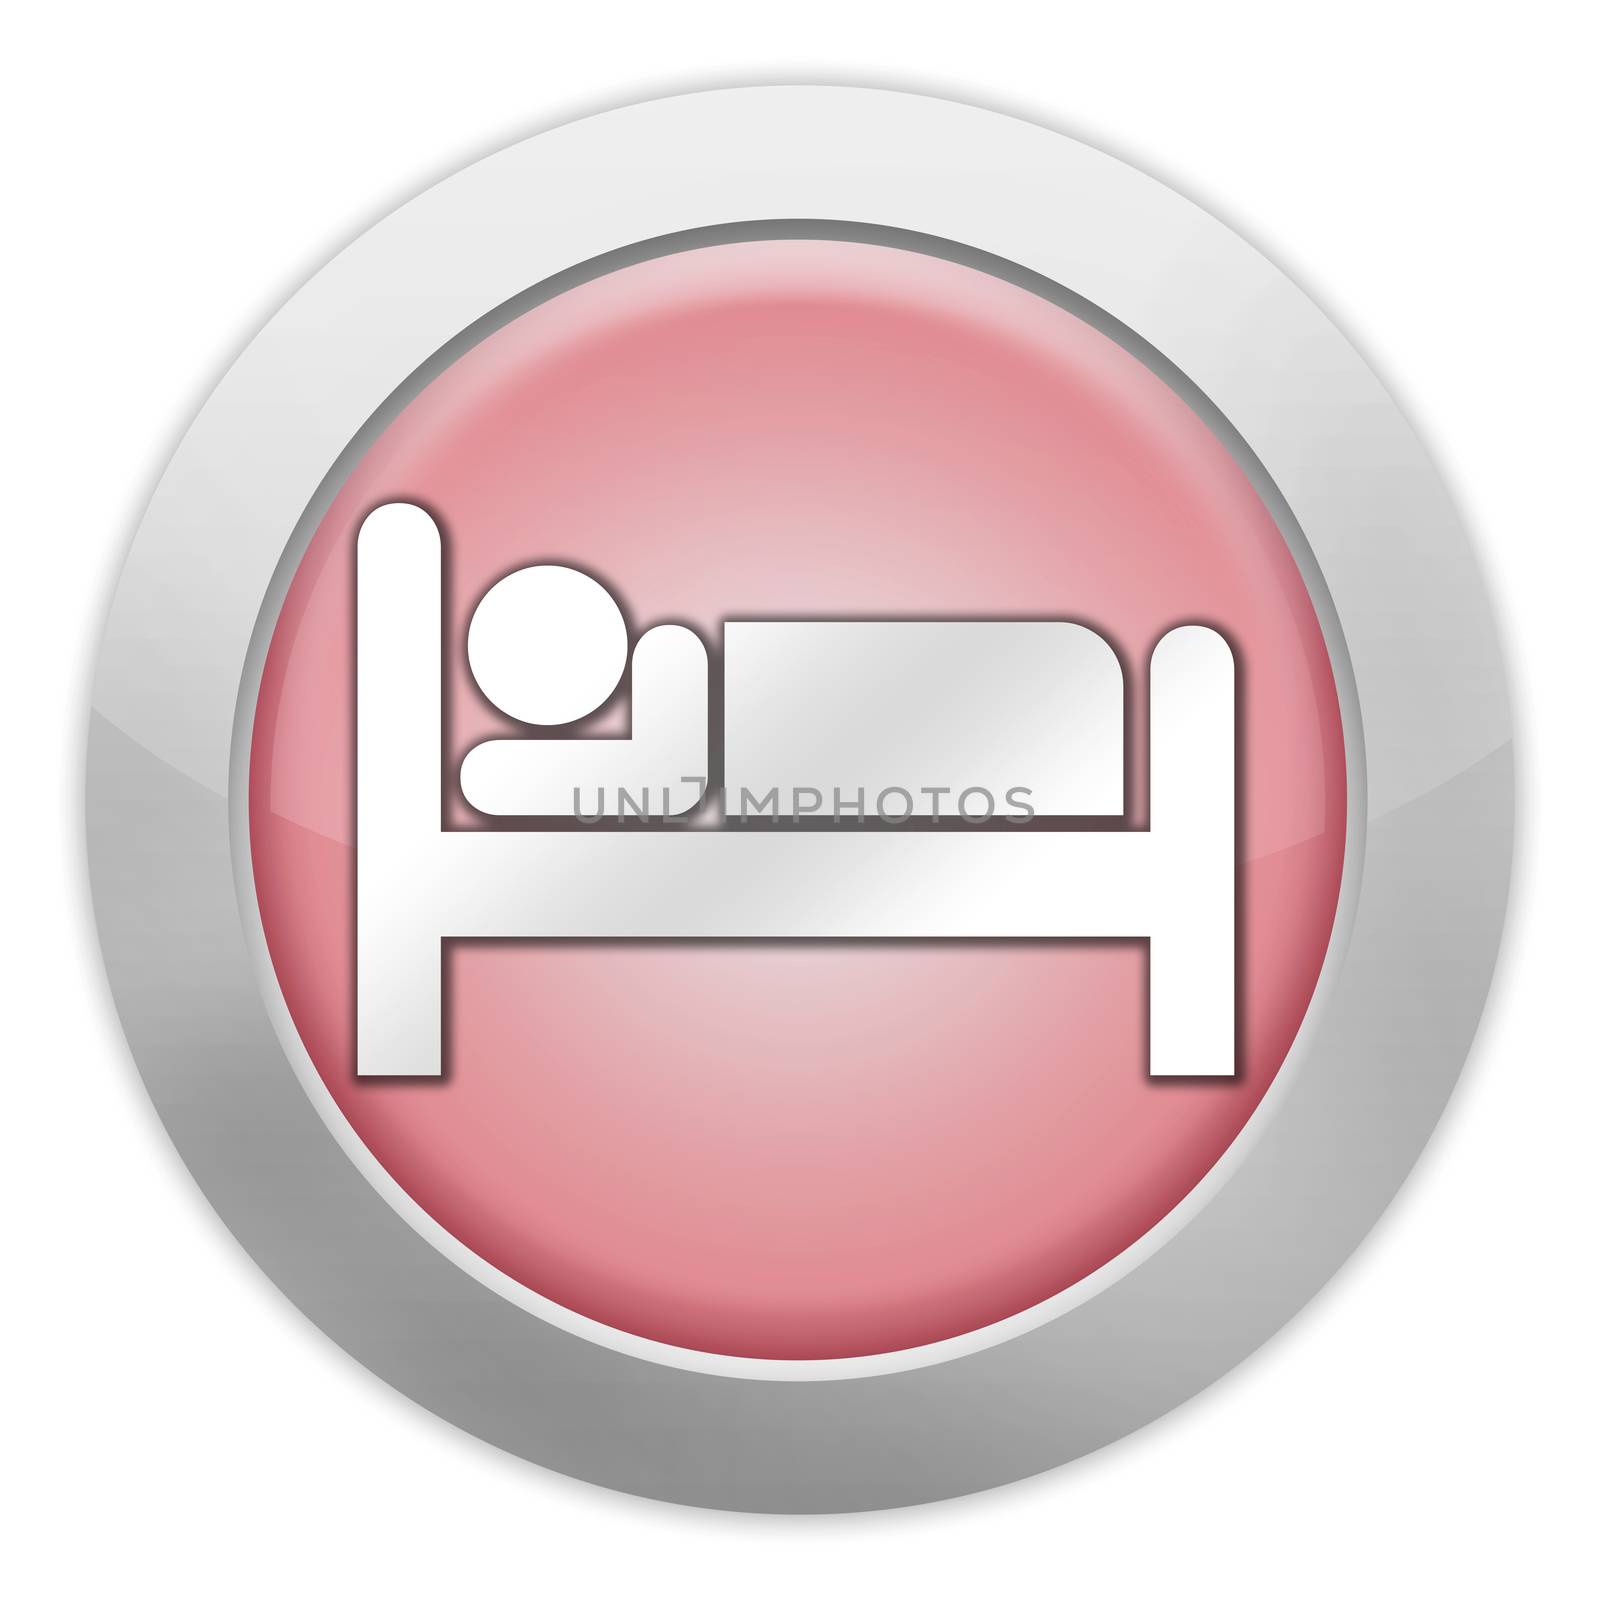 Icon, Button, Pictogram Hotel, Lodging by mindscanner